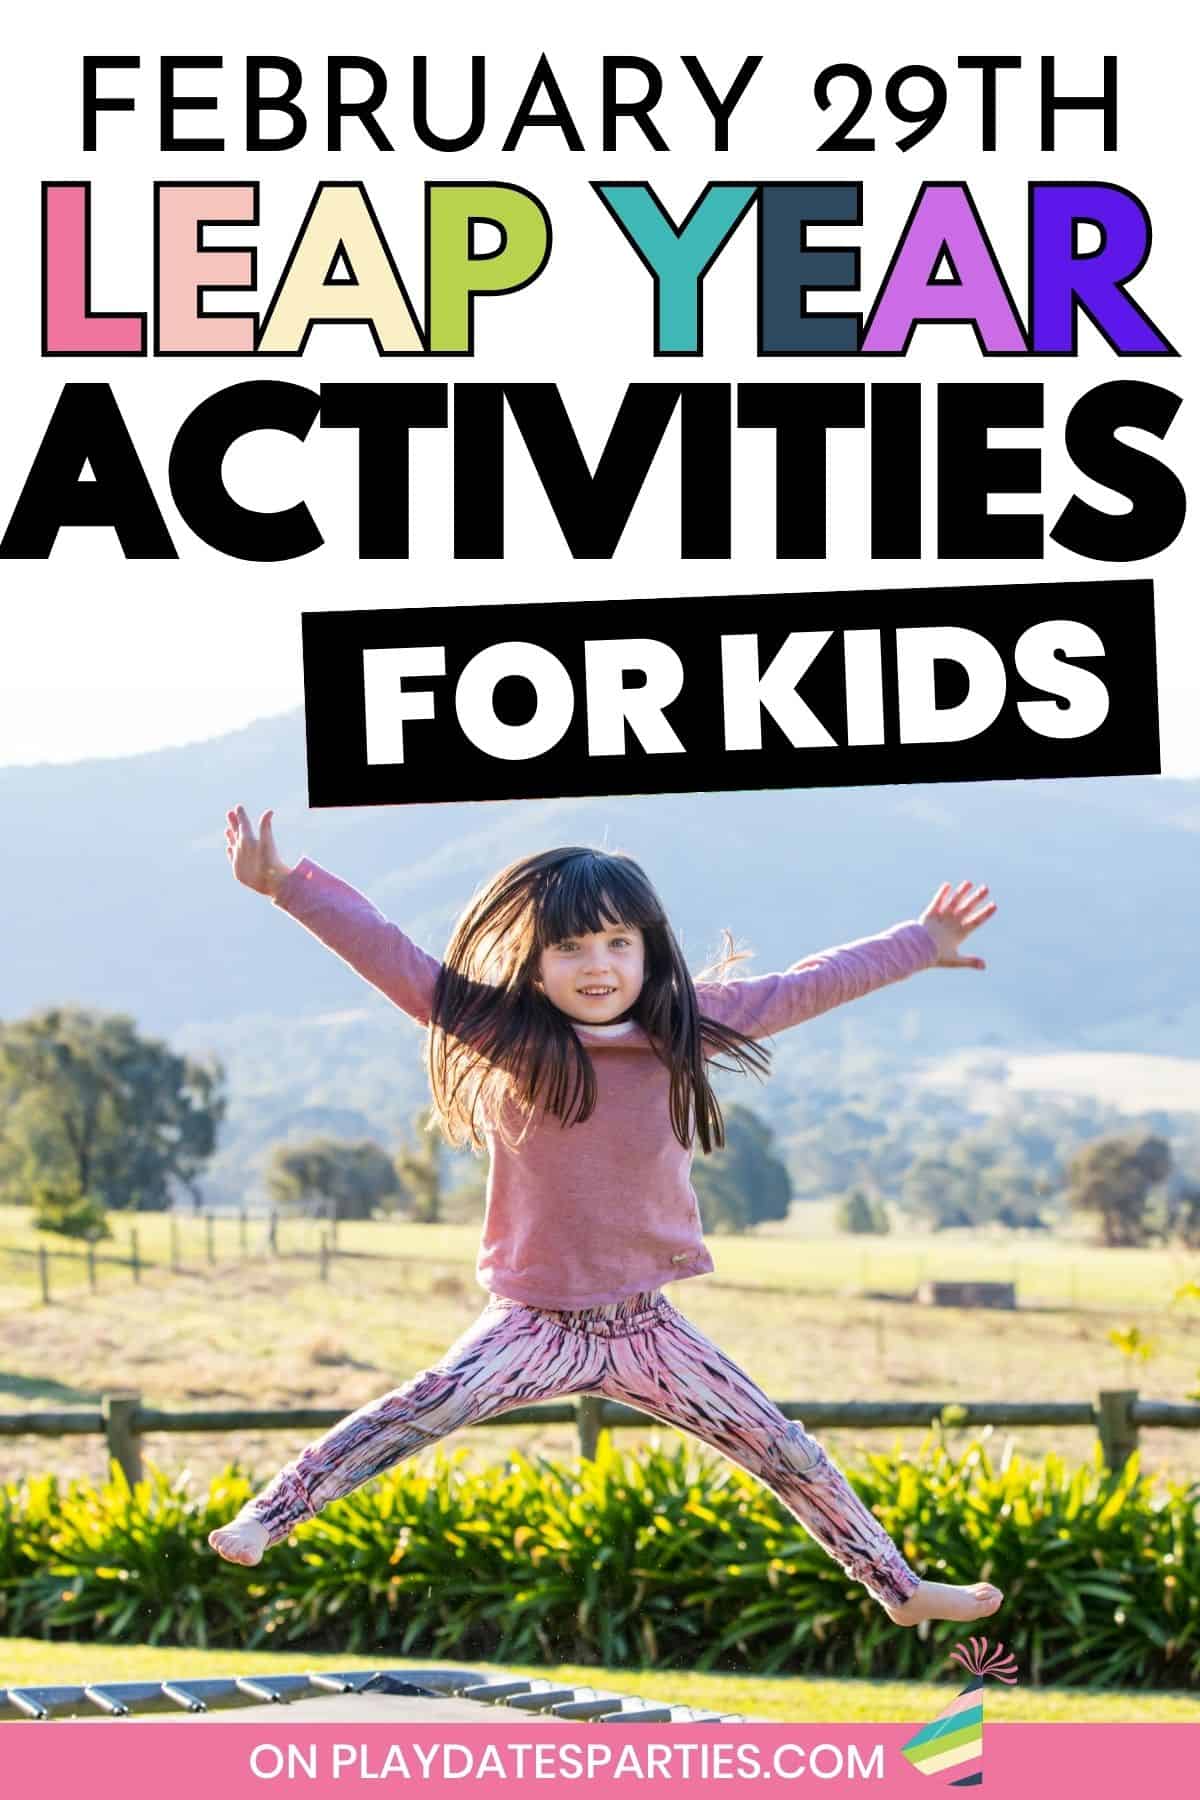 Leap Year Ideas with Kids Pin Image.